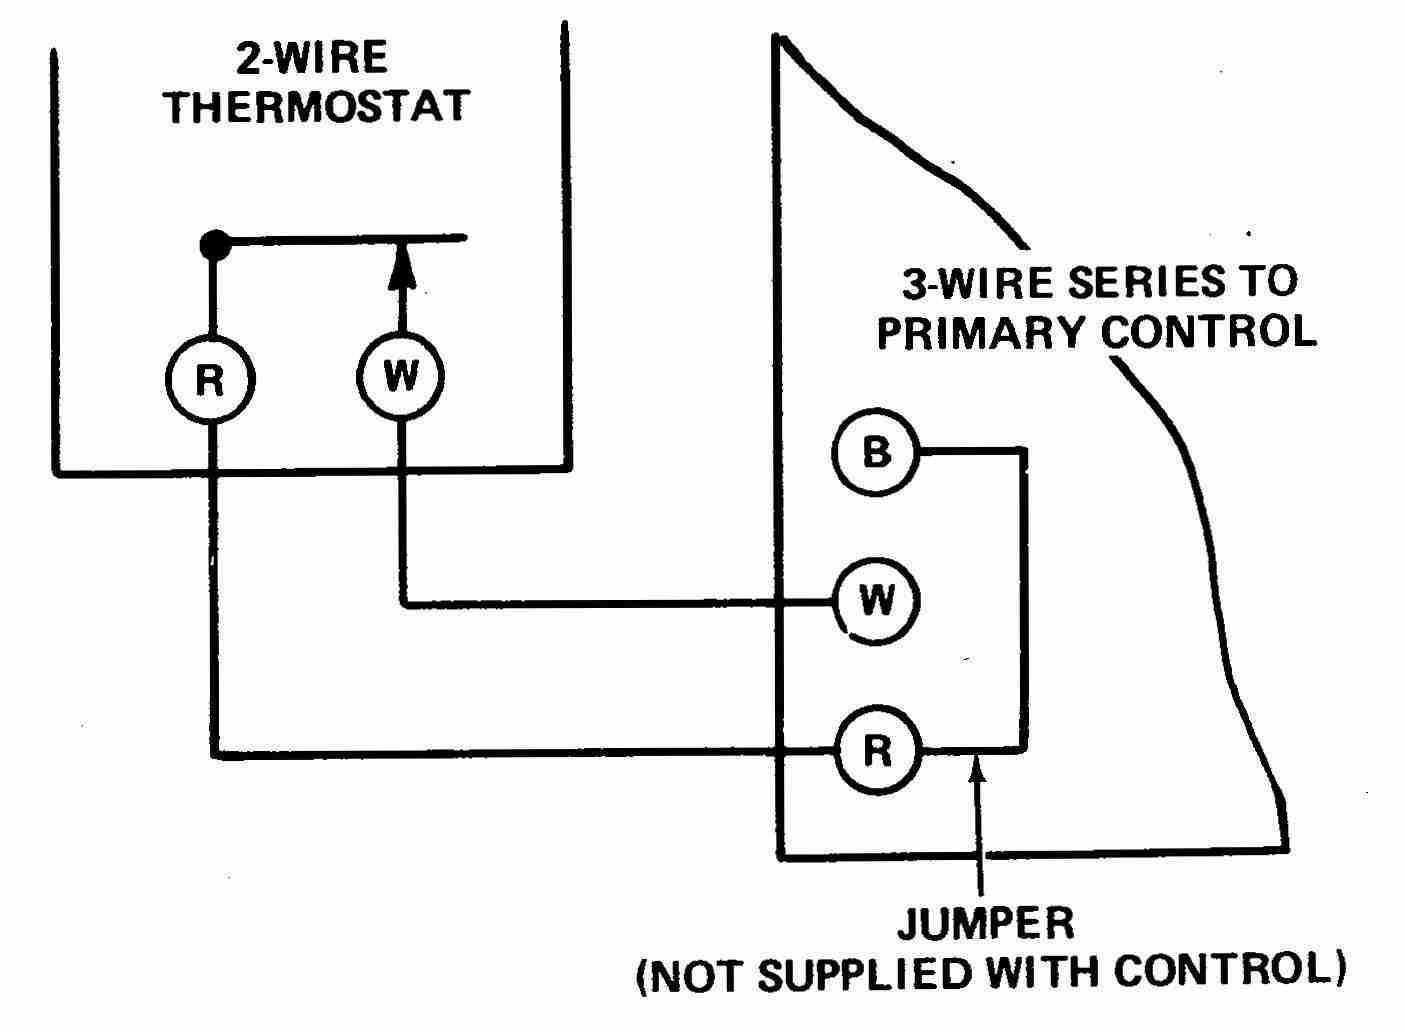 4 Wire Thermostat Heat Pump Wiring Diagrams - Wiring Diagrams Hubs - Honeywell Wiring Diagram